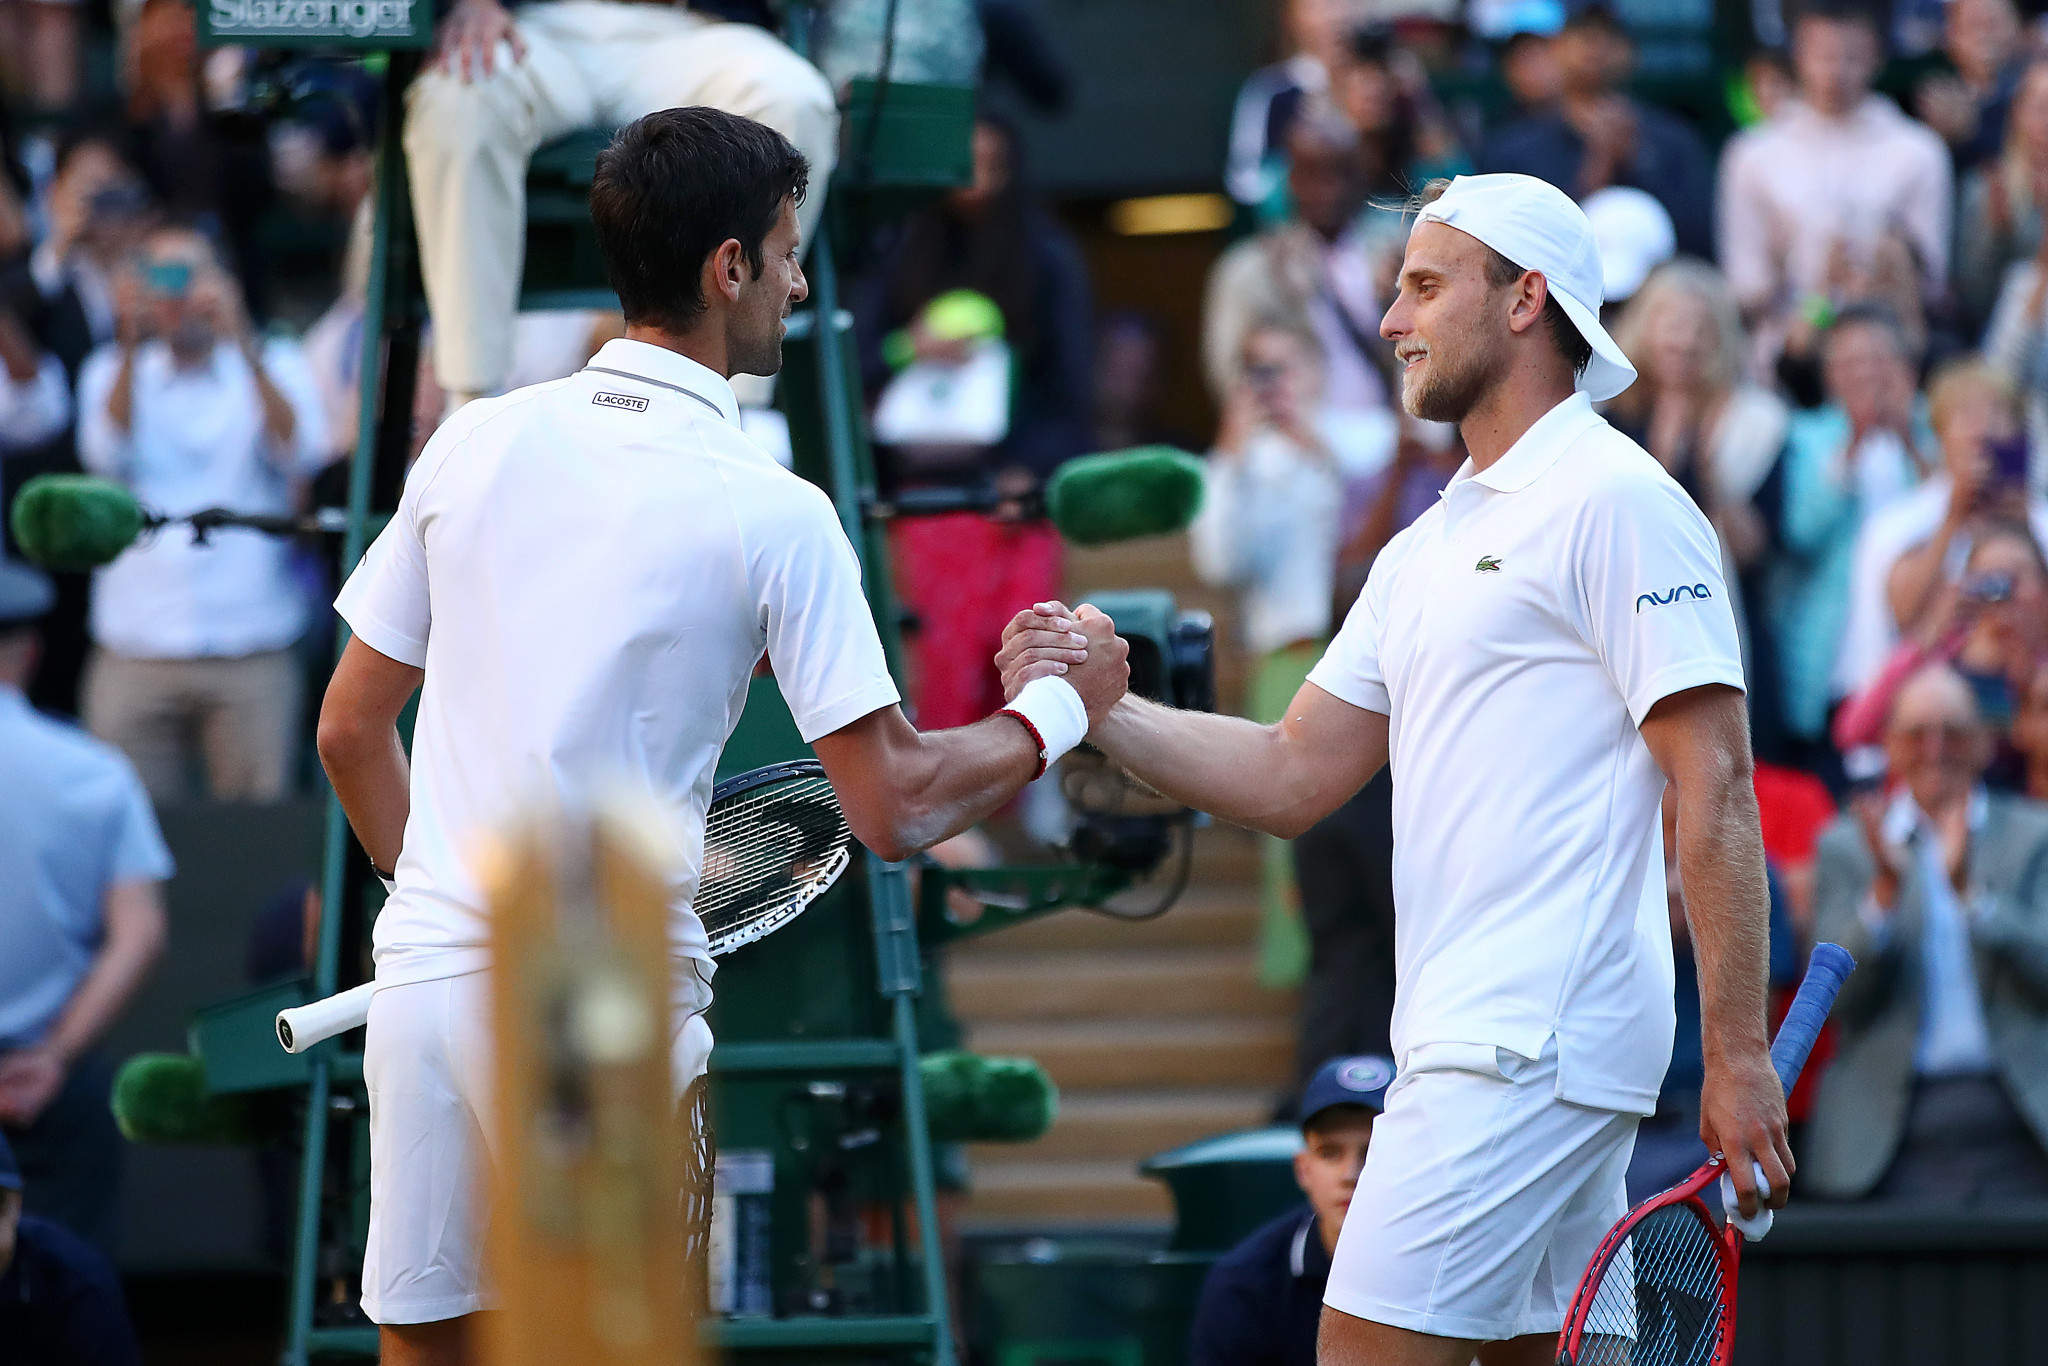 The duo shake hands at the net after Djokovic's straight-sets win ©Getty Images